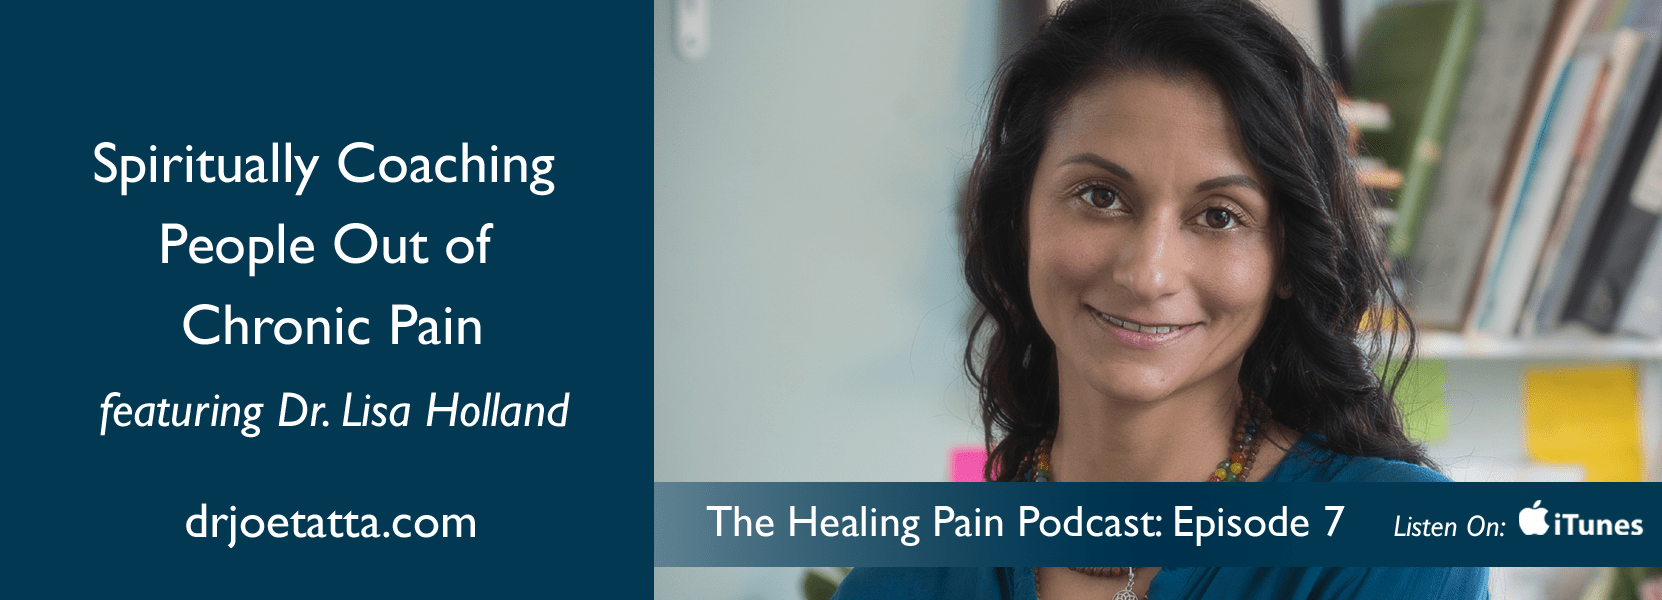 Lisa-Holland-Spiritually-Coaching-People-Out-of-Chronic-Pain